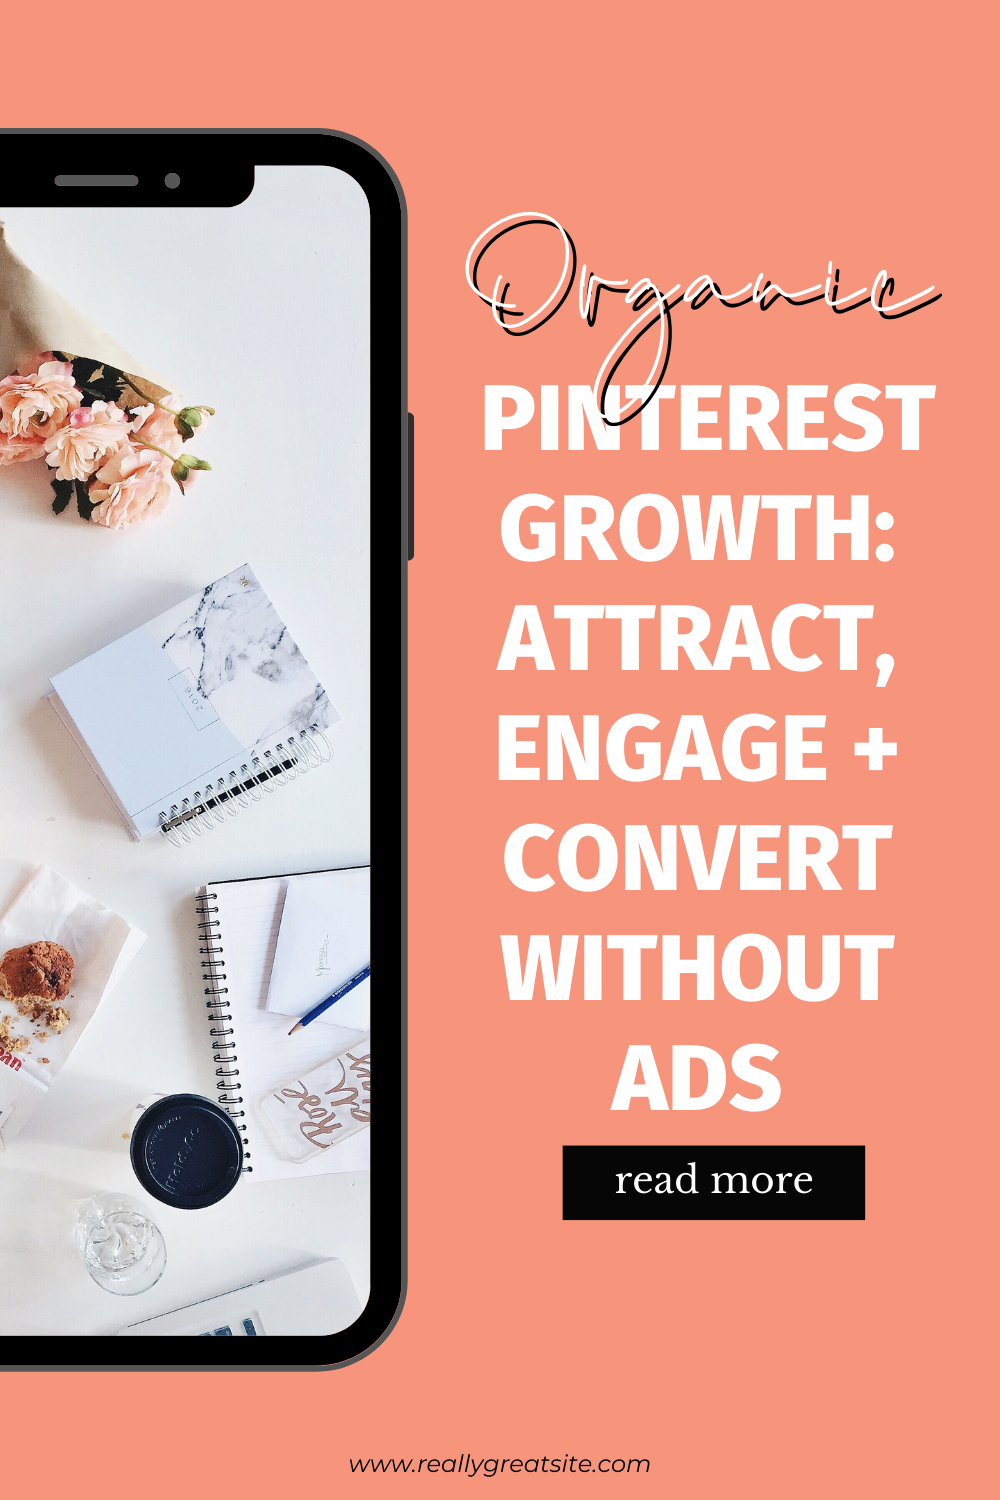 Organic Pinterest Growth Attract, Engage + Convert Without Ads by Jen Vazquez Media Pinterest Manager